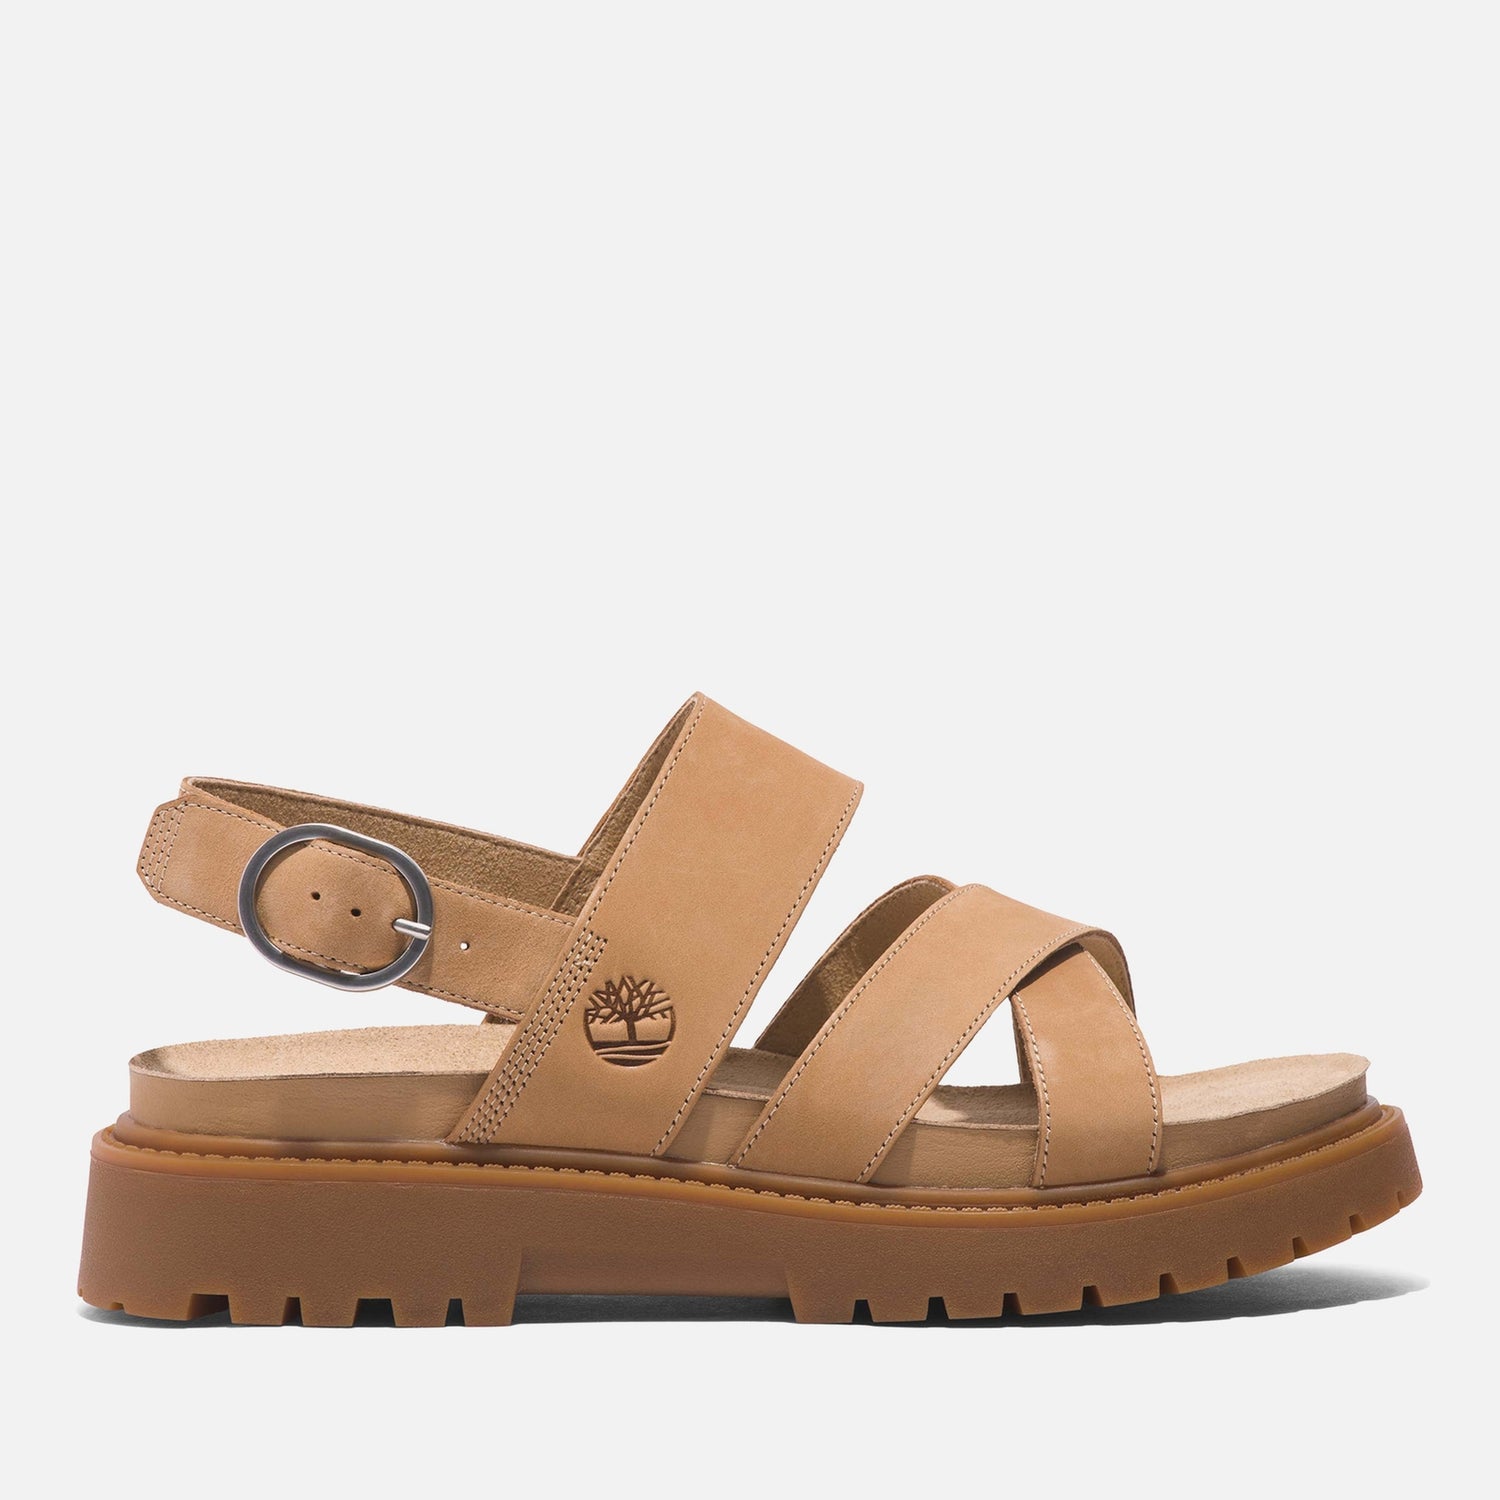 Timberland Women's Clairemont Way Leather Sandals - UK 7